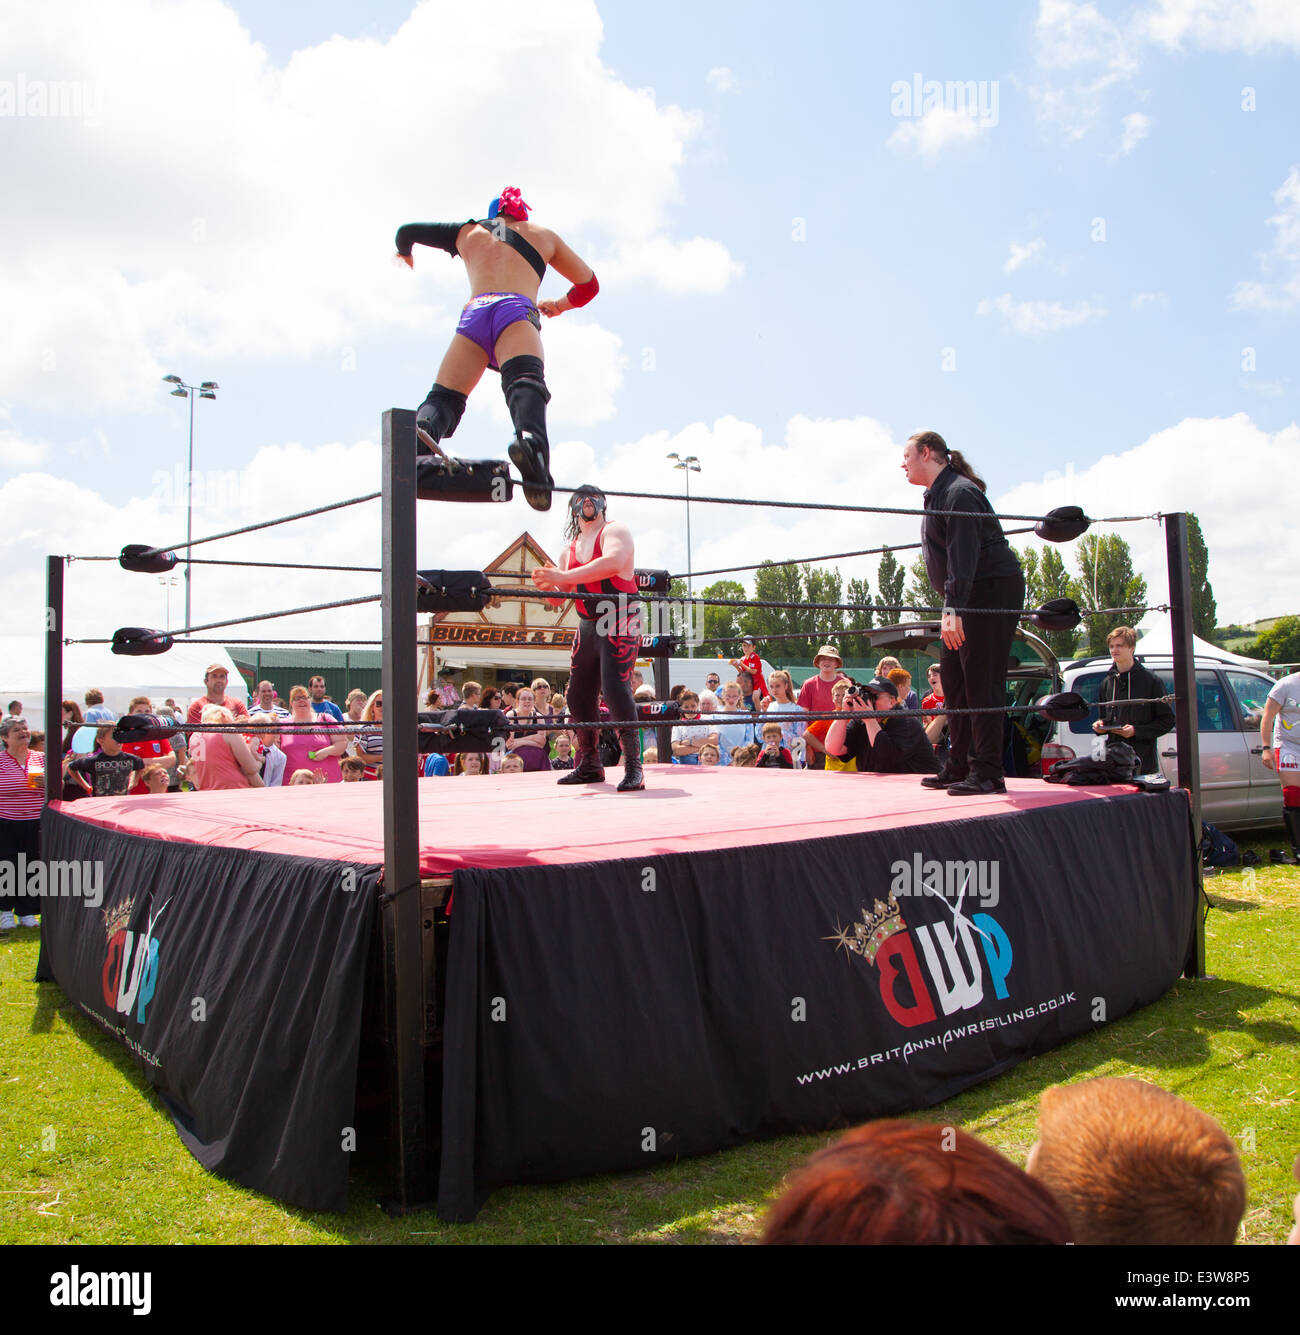 A wrestler wearing a mask leaping off the ropes onto his opponent watched by a crowd at Denbigh town summer carnival Stock Photo